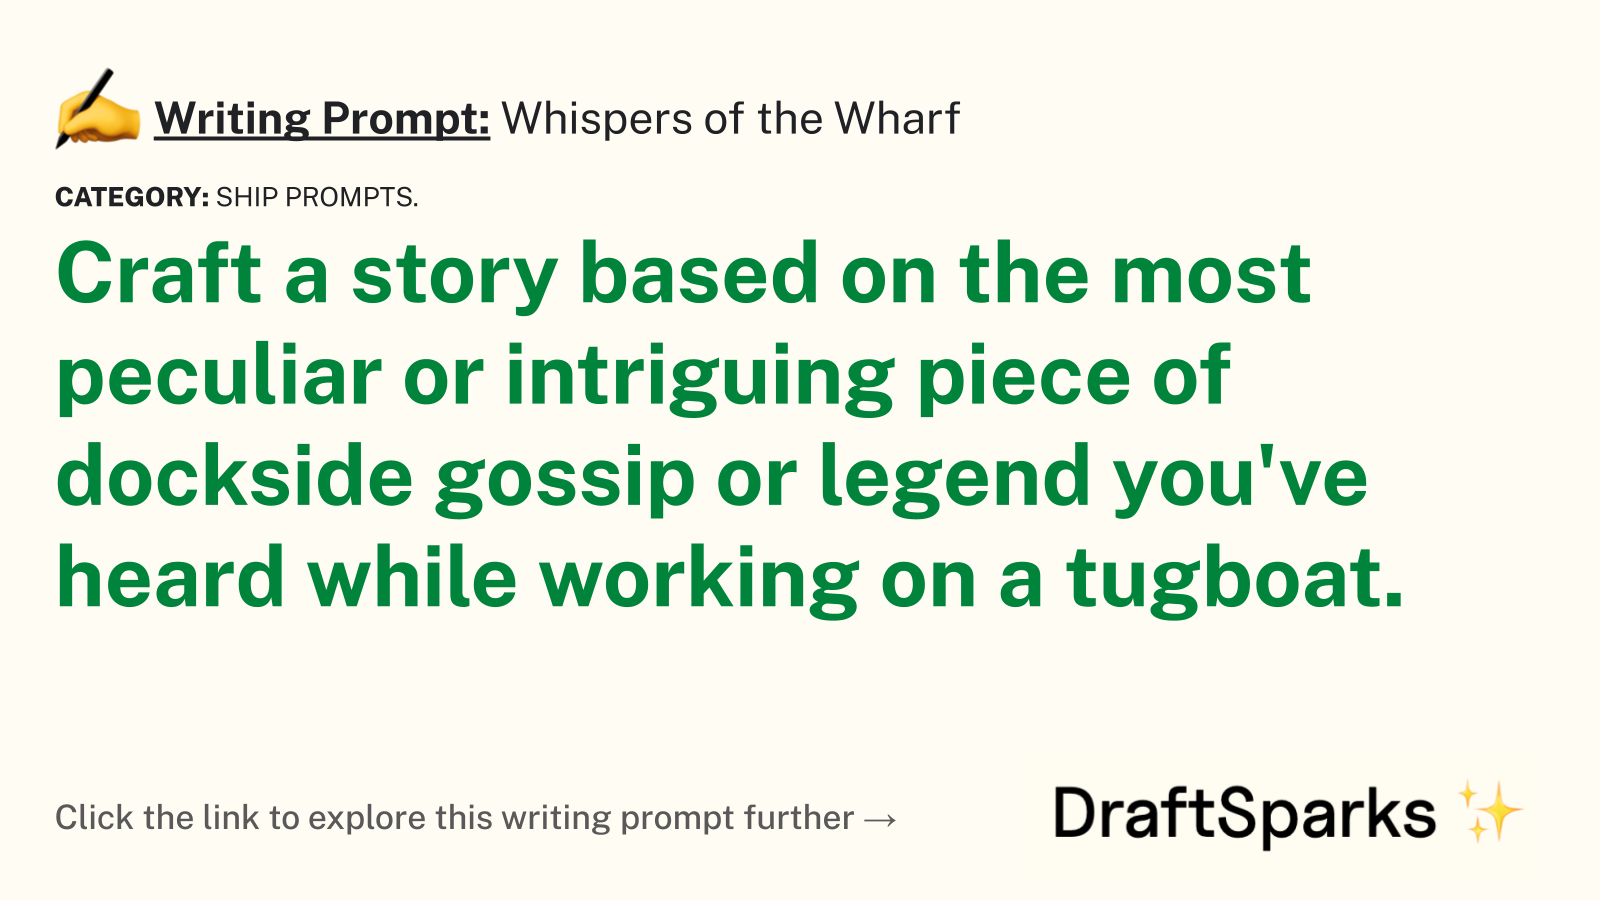 Whispers of the Wharf